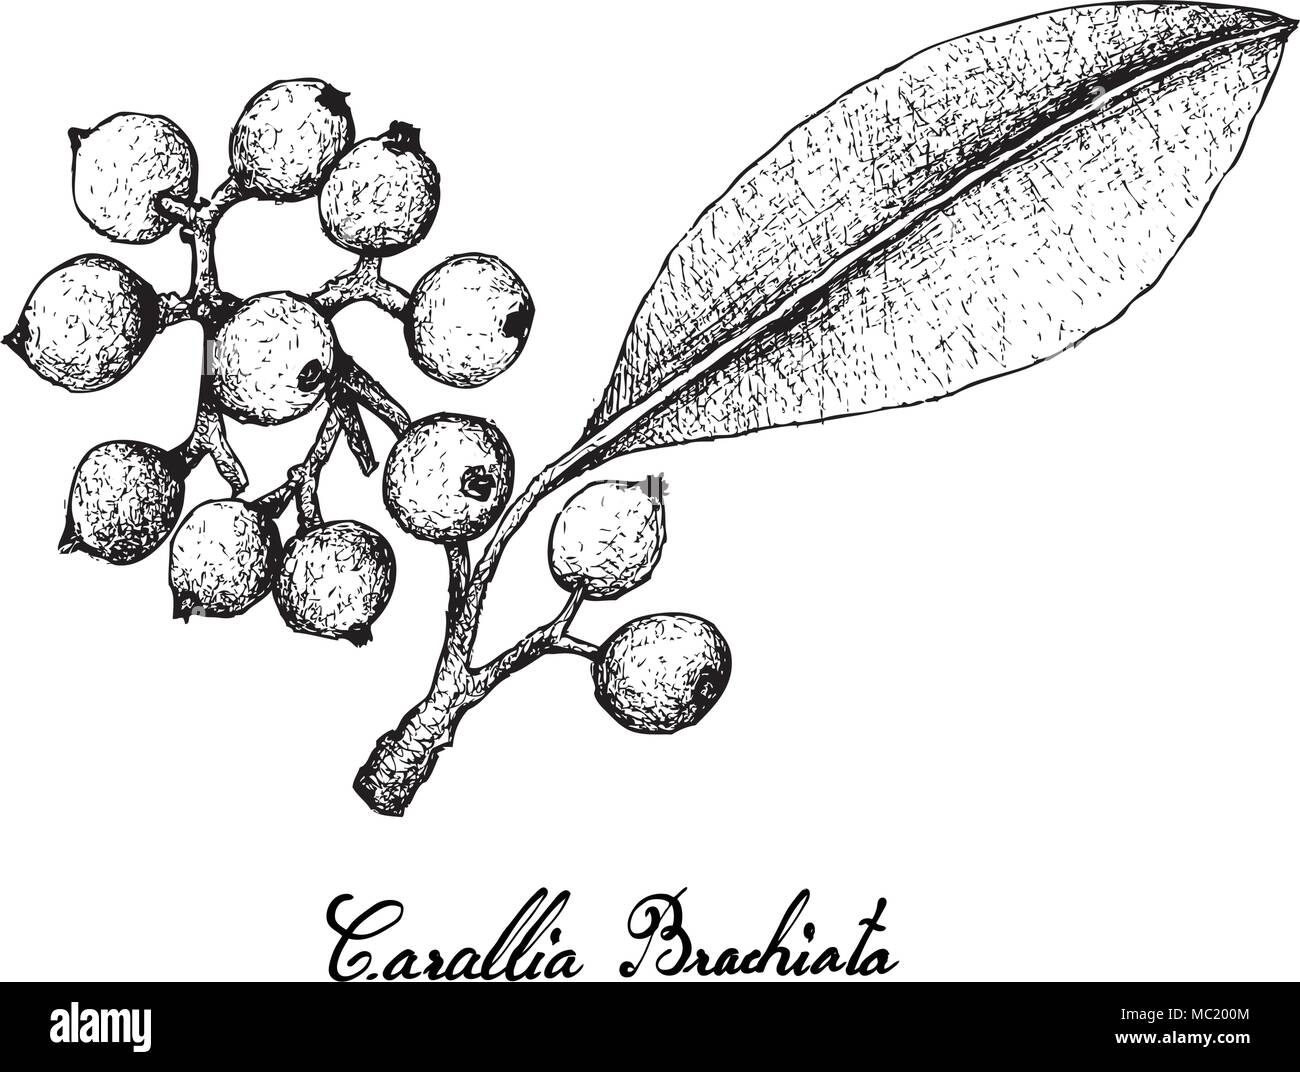 Berry Fruit, Illustration Hand Drawn Sketch of Carallia Brachiata Fruits Isolated on White Background. Stock Vector